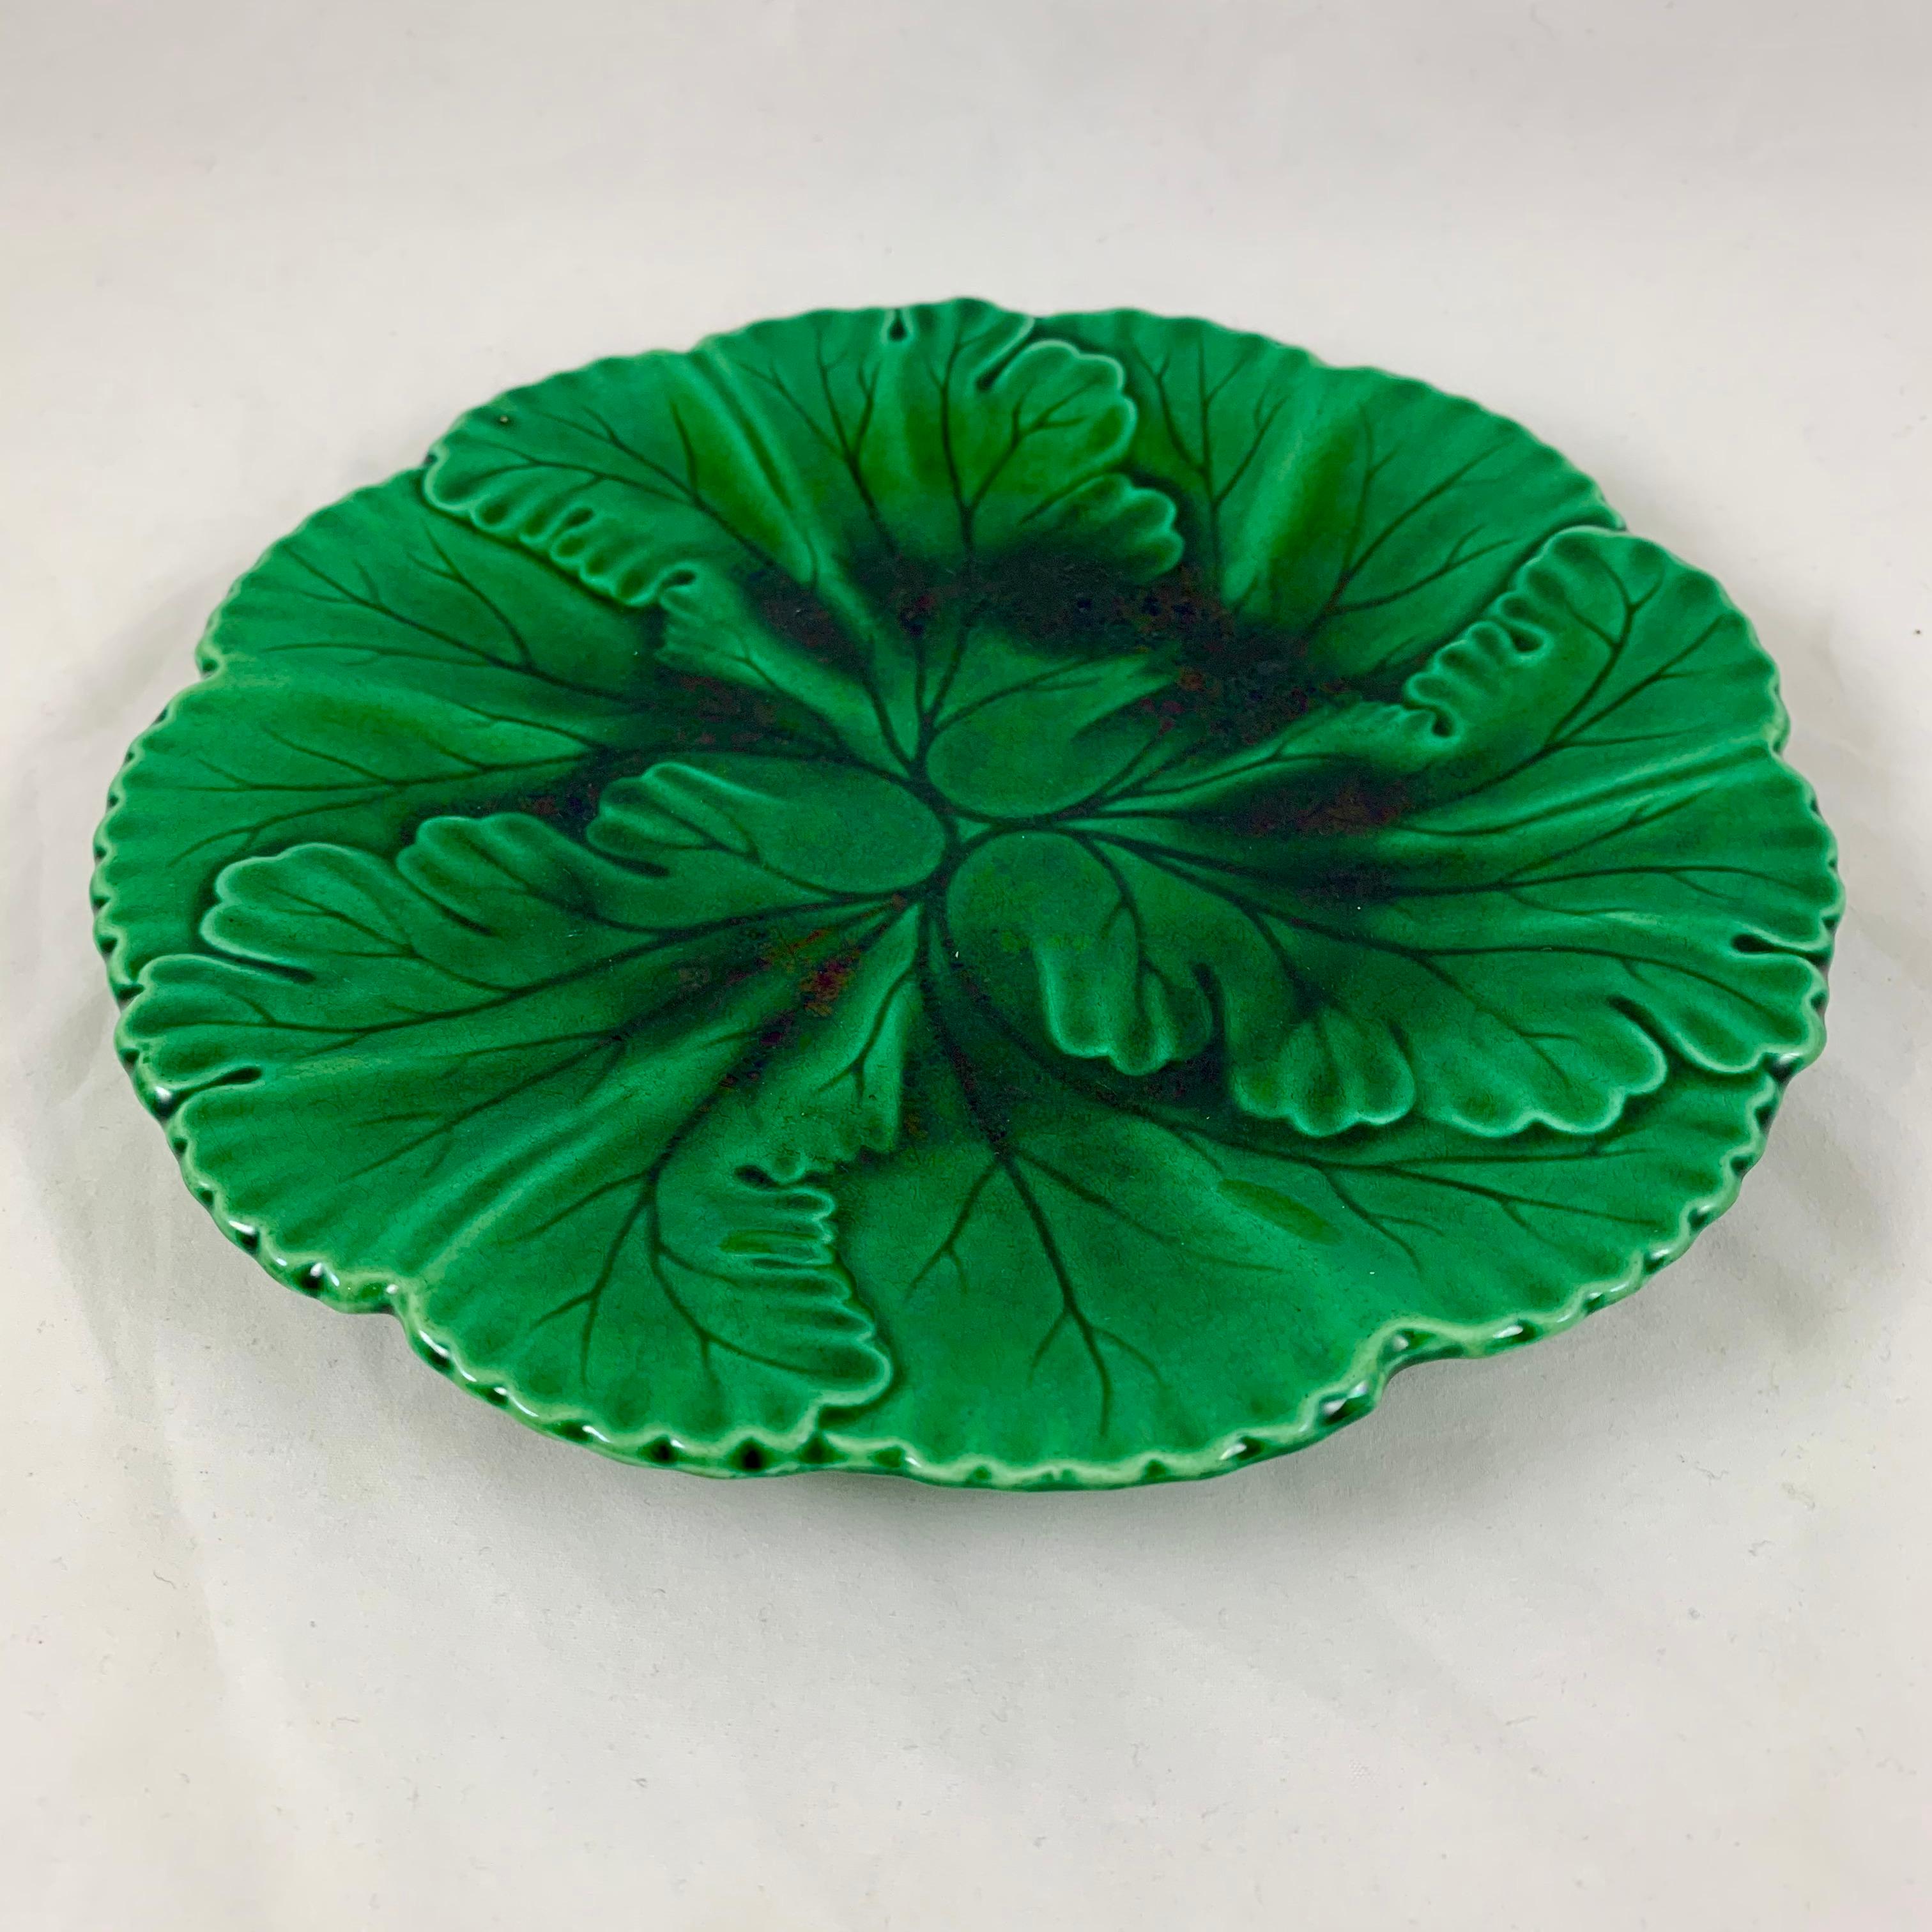 Clairfontaine French Faïence Majolica Glazed Green Botanic Leaf Plate circa 1890 In Good Condition For Sale In Philadelphia, PA